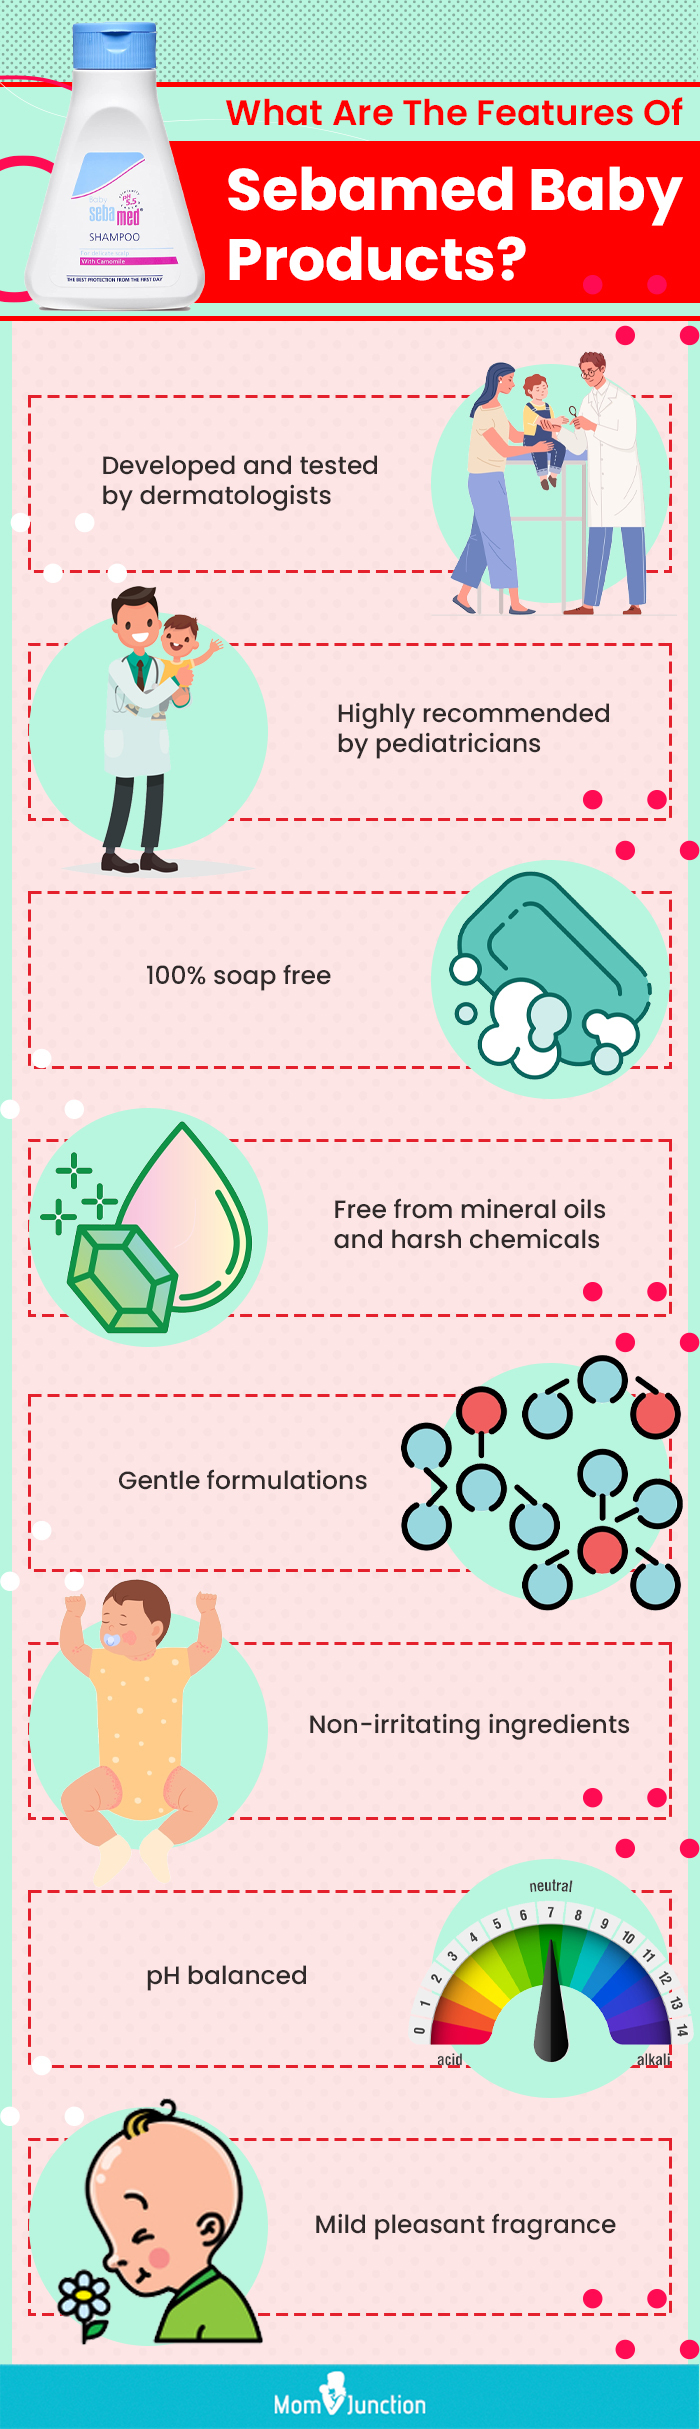 What Are The Features Of Sebamed Baby Products (infographic)